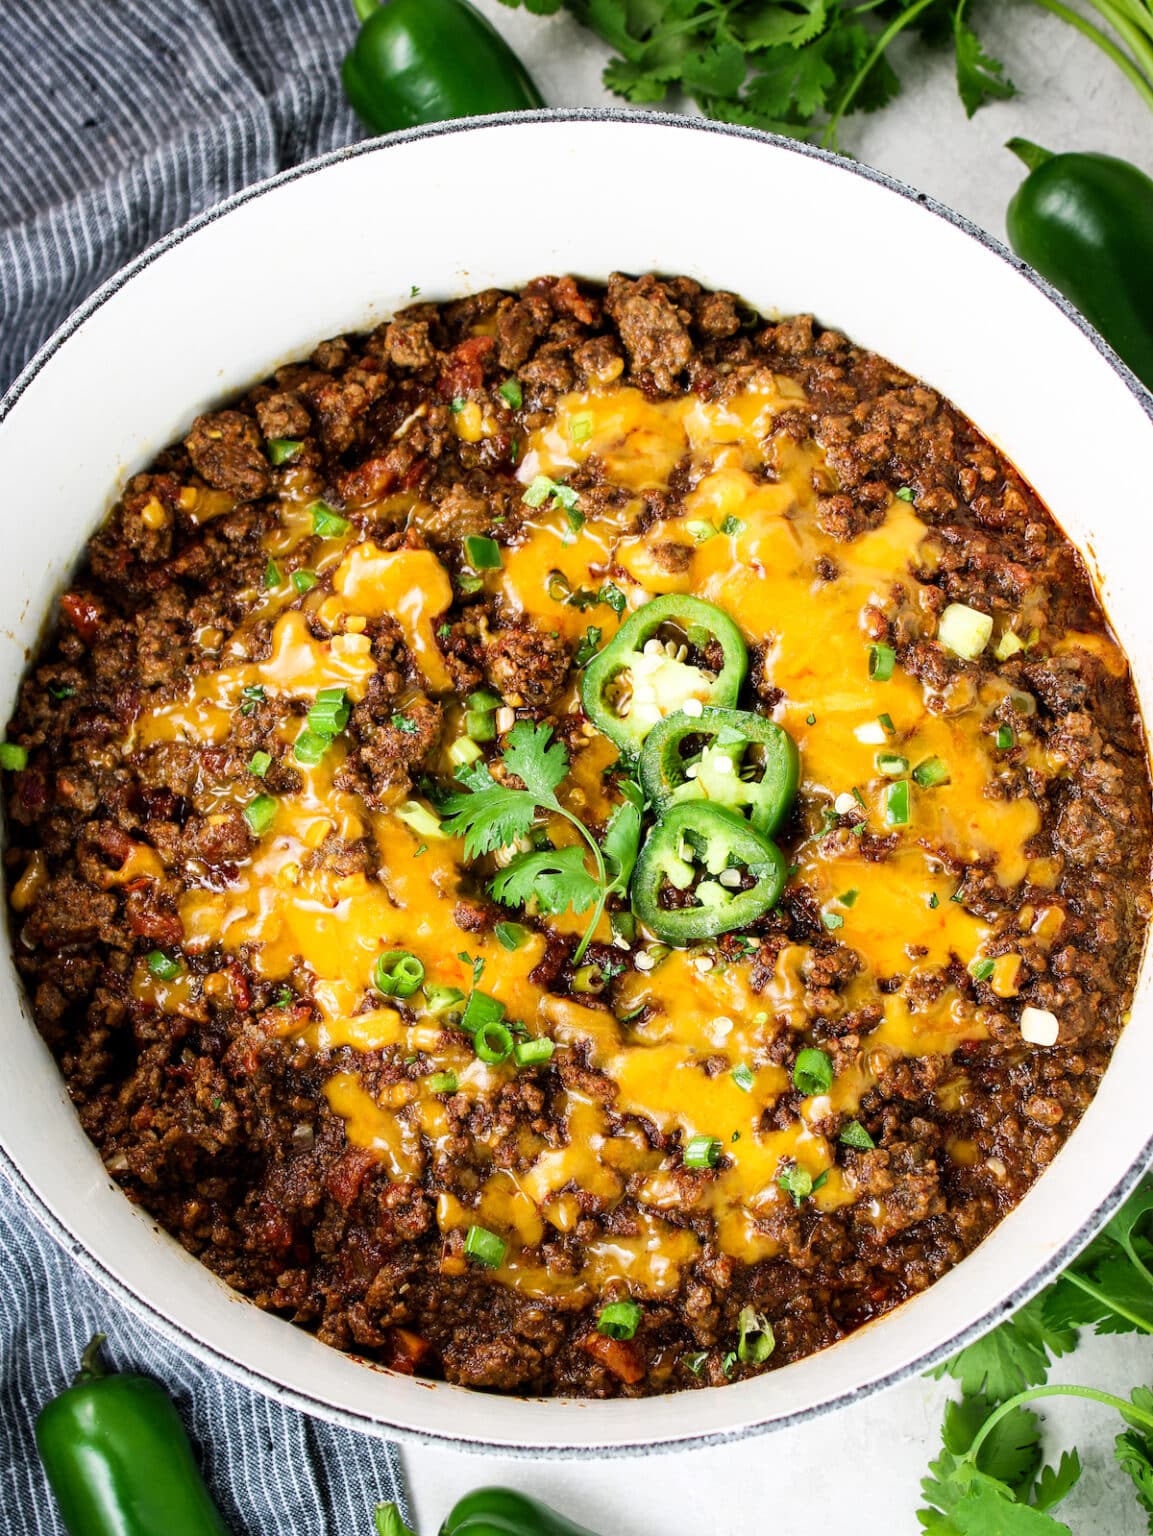 Best Texas Style Chili Recipe (No Beans) - Taste And See